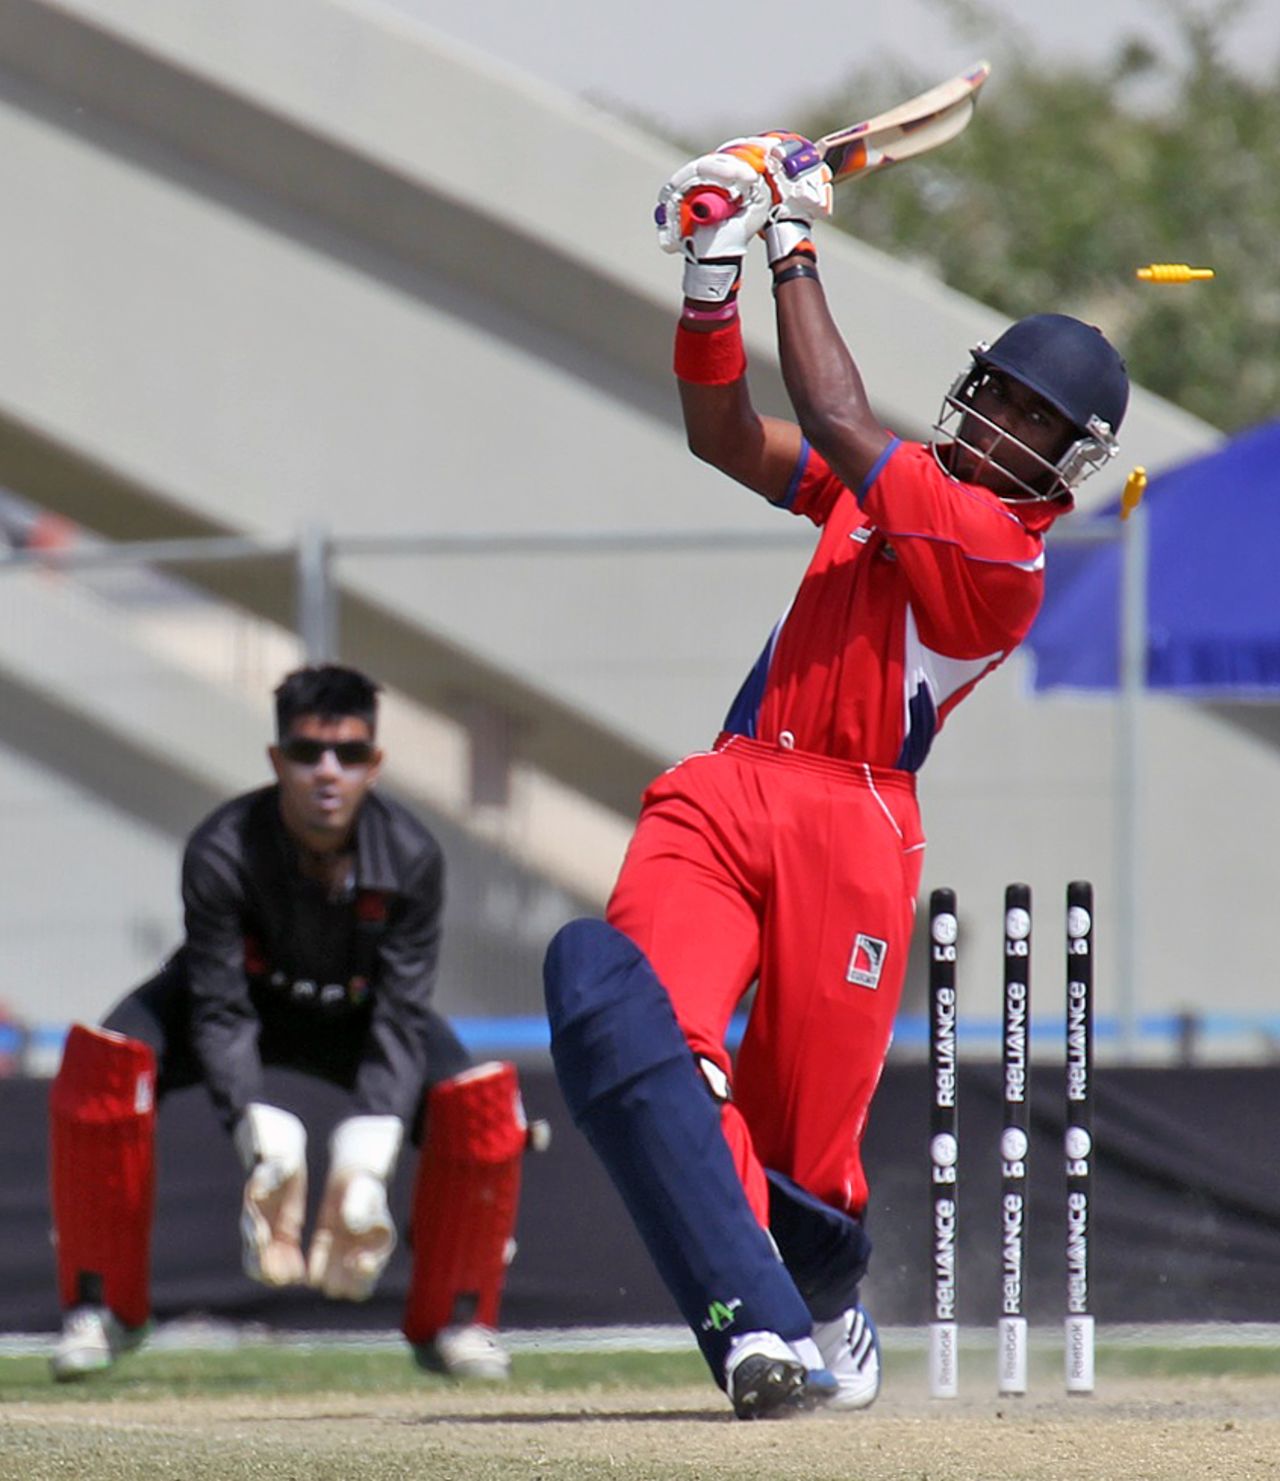 Bermuda's Kamau Leverock is bowled by Irfan Ahmed during the Group A, ICC World Twenty20 Qualifier match between Hong Kong and Bermuda played at the ICC GCA2 ground in Dubai on 14th March 2012 